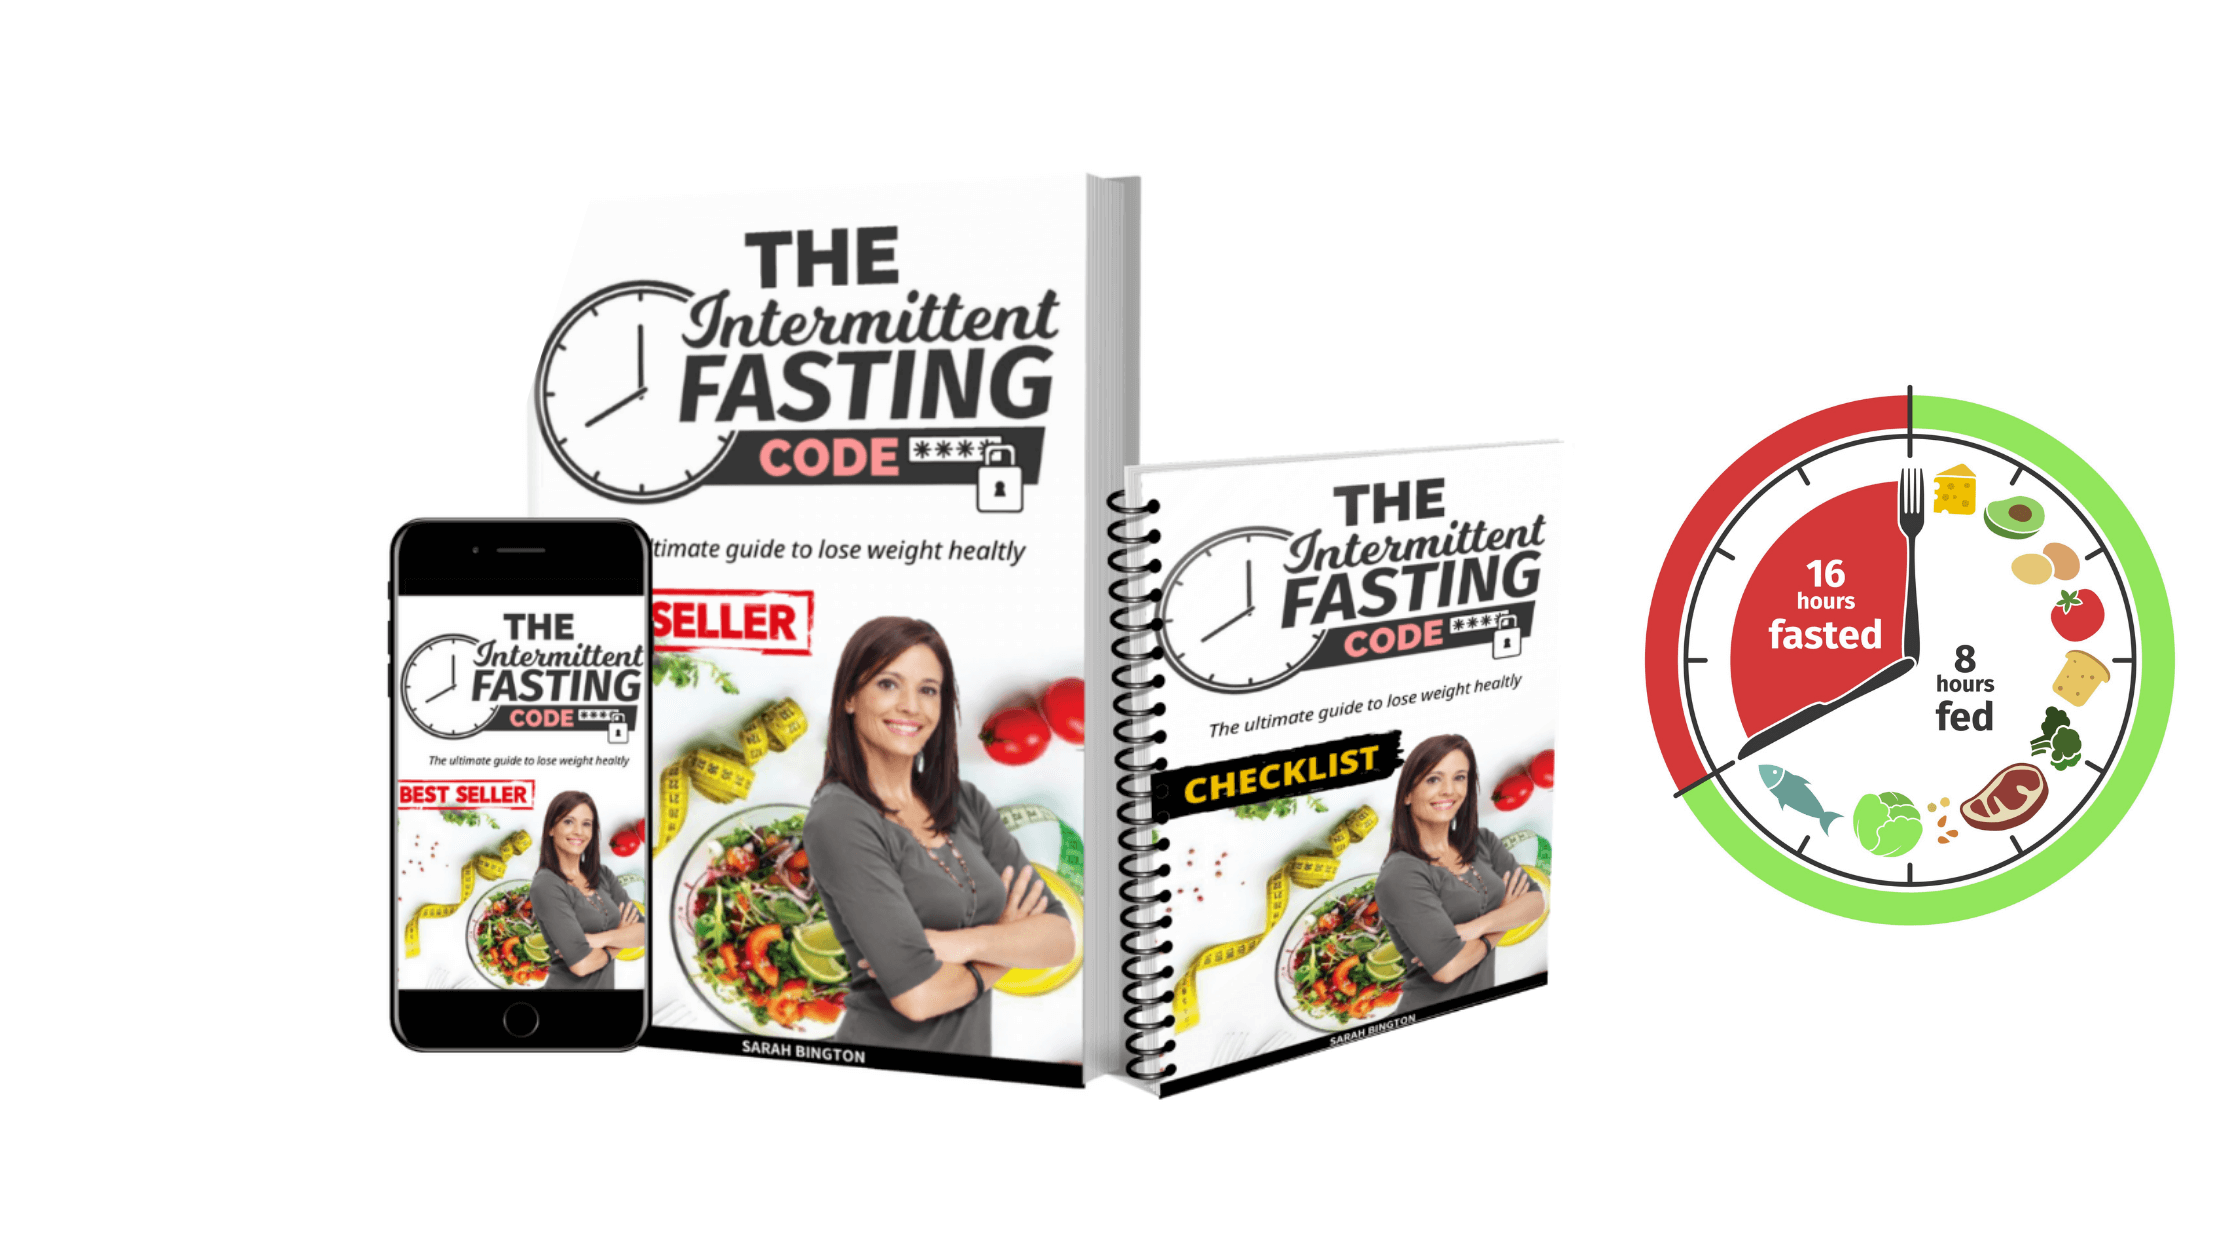 The Intermittent Fasting Code